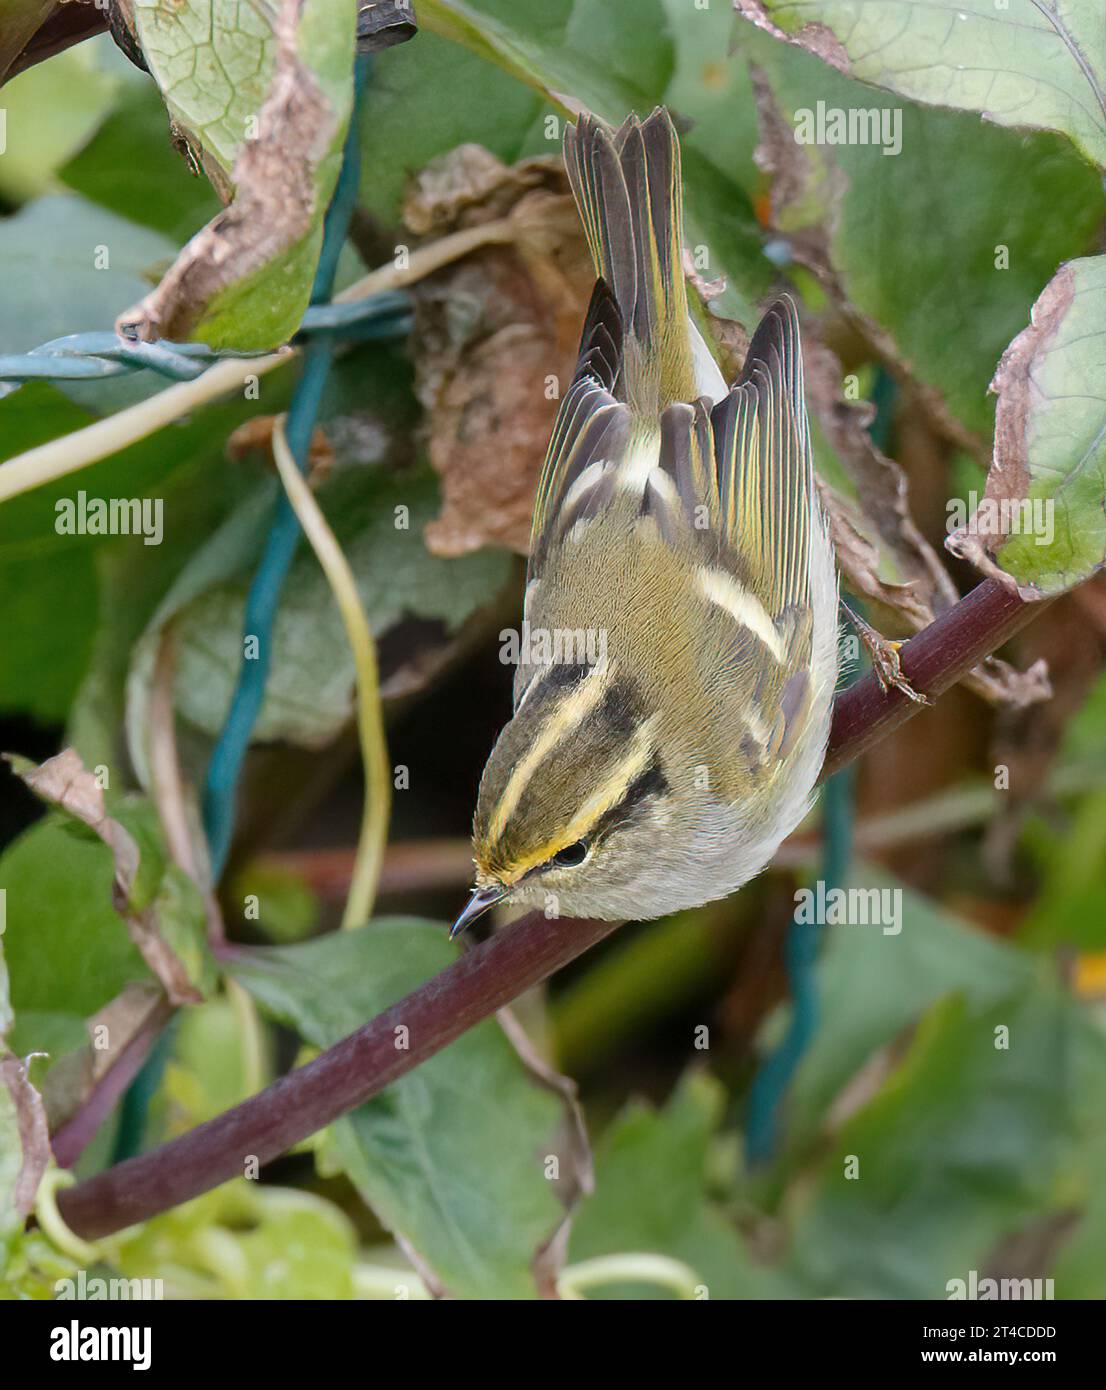 Pallas' leaf warbler, Pallas's warbler (Phylloscopus proregulus), ueerching on a branch in a shrub, front view, United Kingdom, Scotland Stock Photo